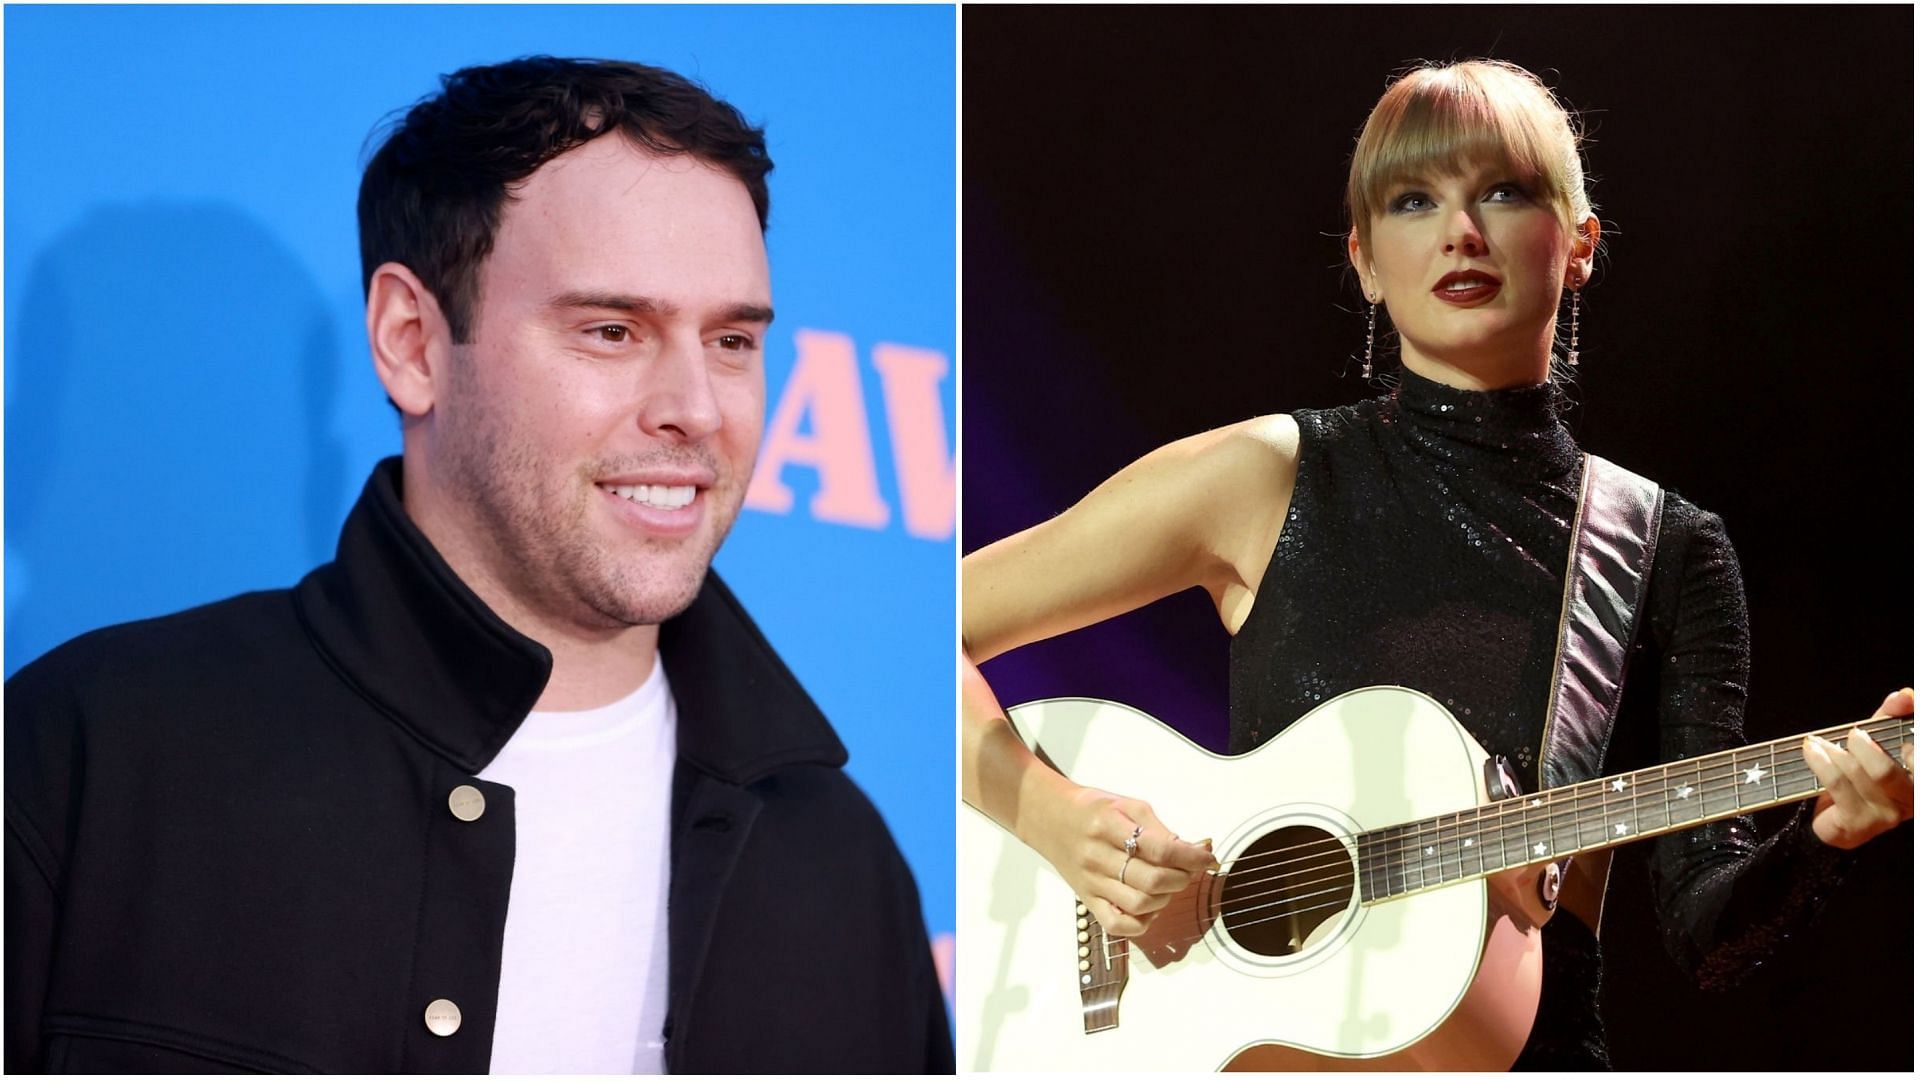 Scooter Braun spoke up on his feud with Taylor Swift (Images via Emma McIntyre and Terry Wyatt/Getty Images)